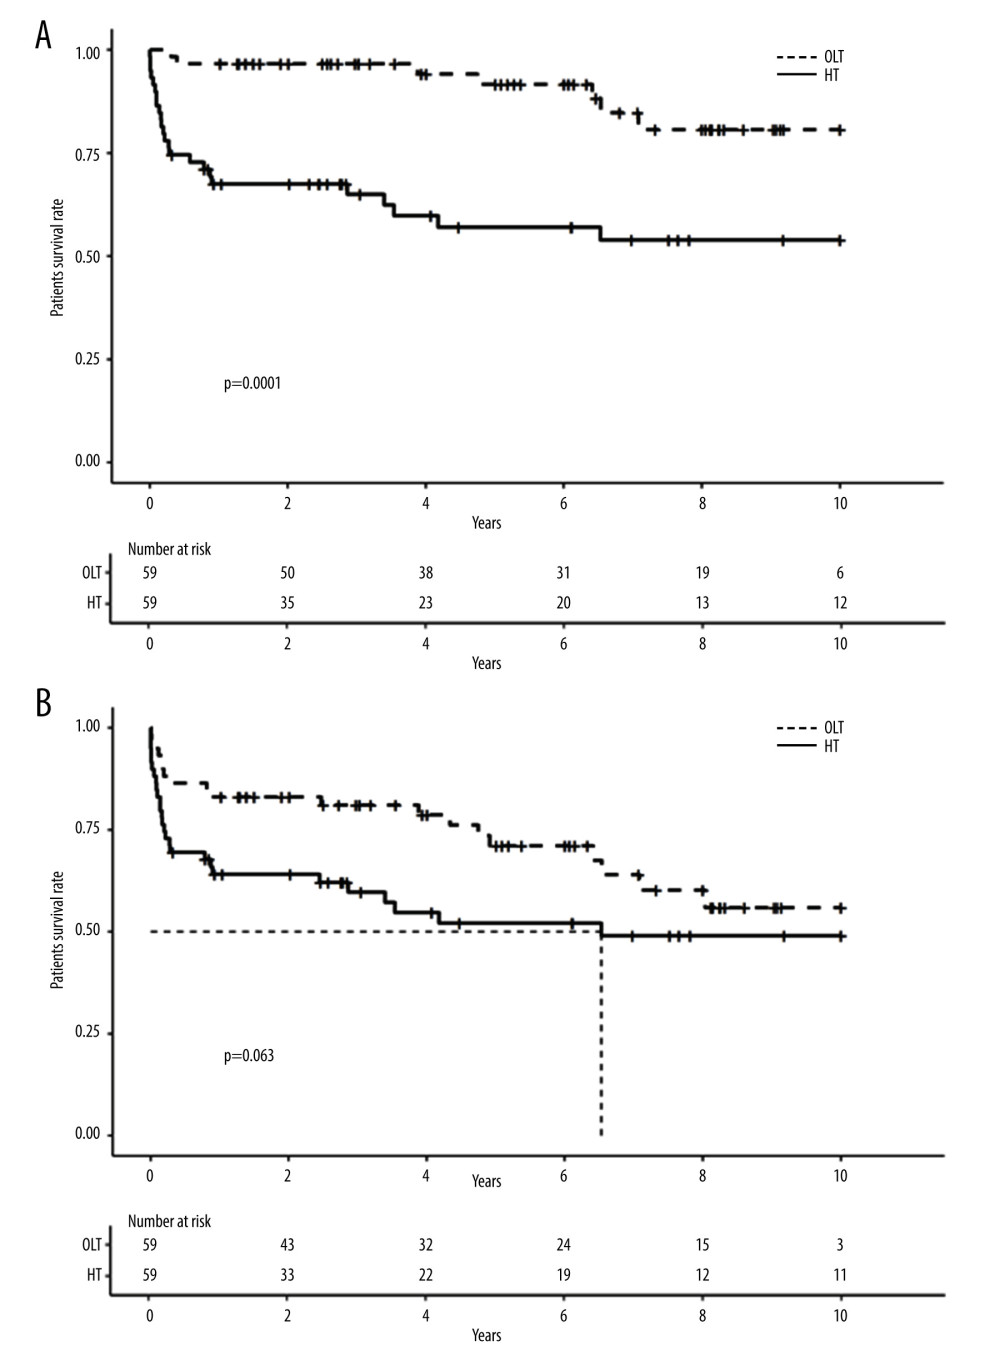 Long-term survival of patients and grafts after HT or orthotopic liver transplantation (OLT). (A). Long-term patient survival; (B) Long-term graft survival.